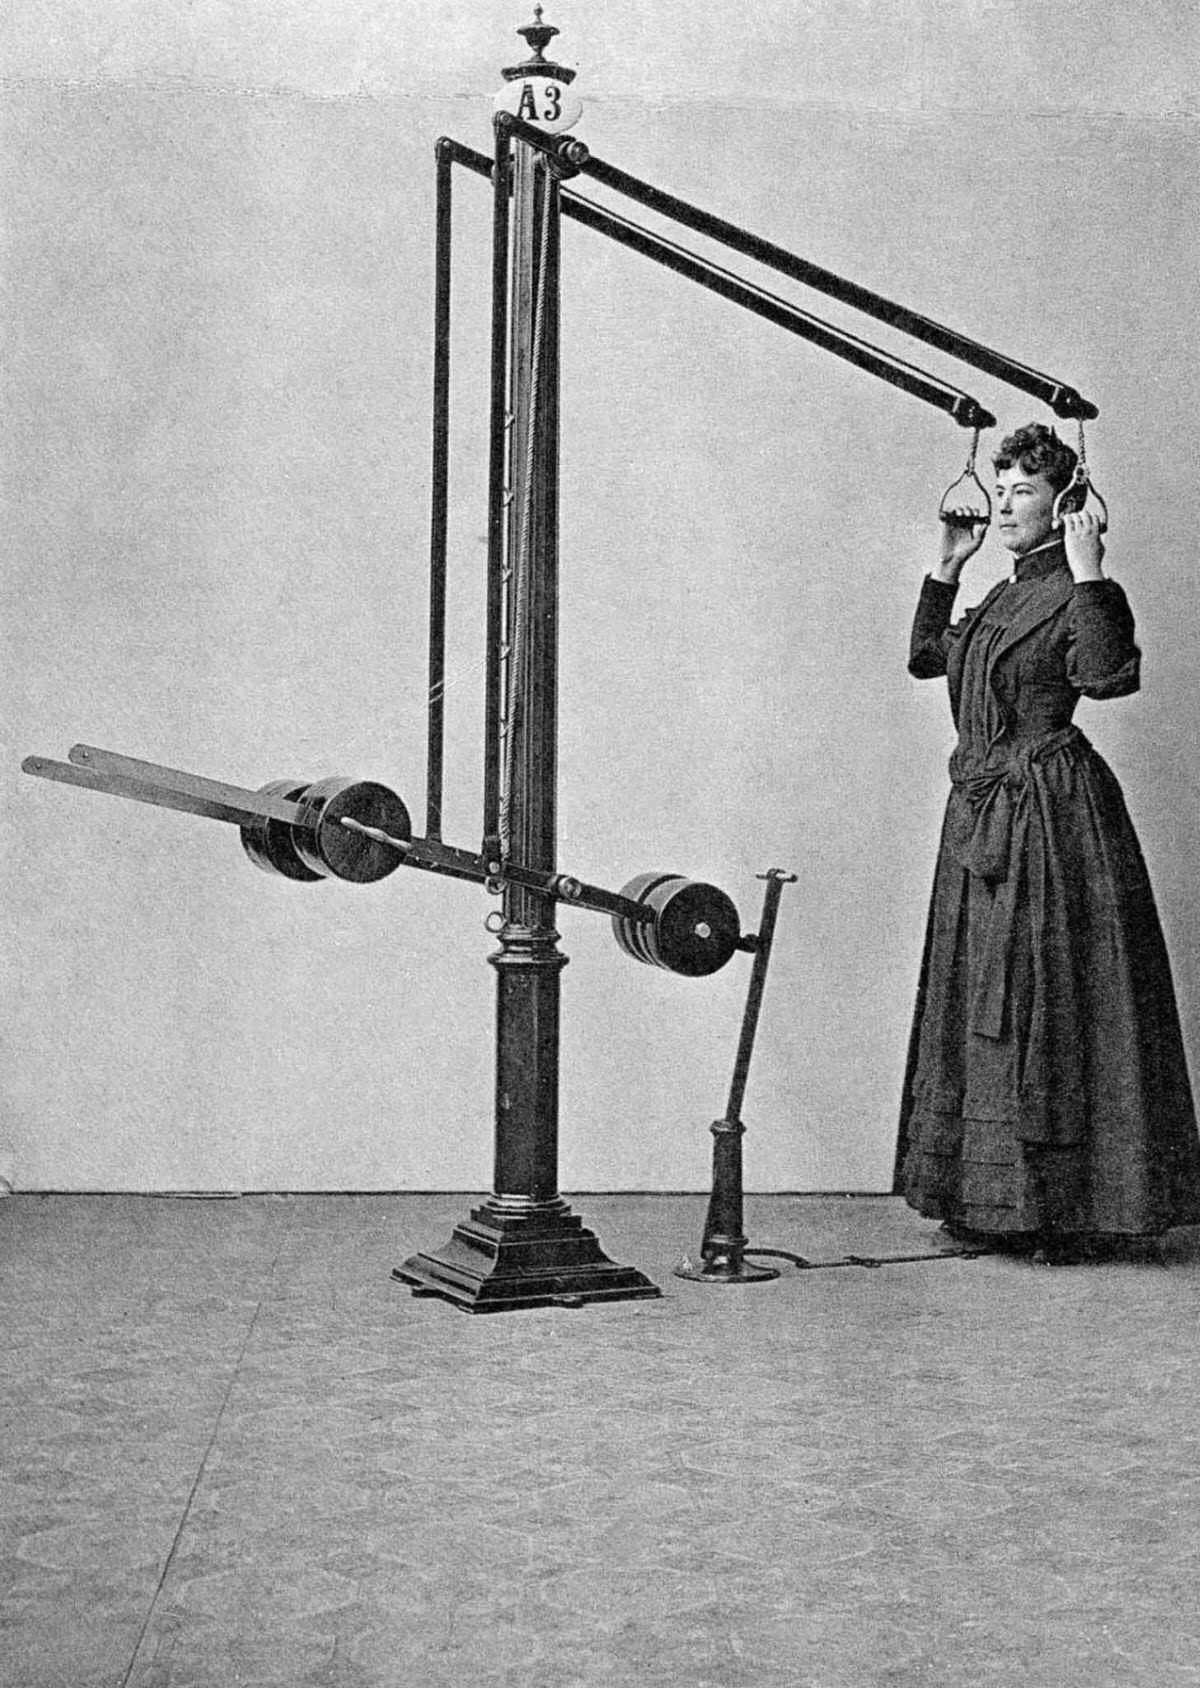 This arm-bending apparatus is good for the arms, shoulders, and back.